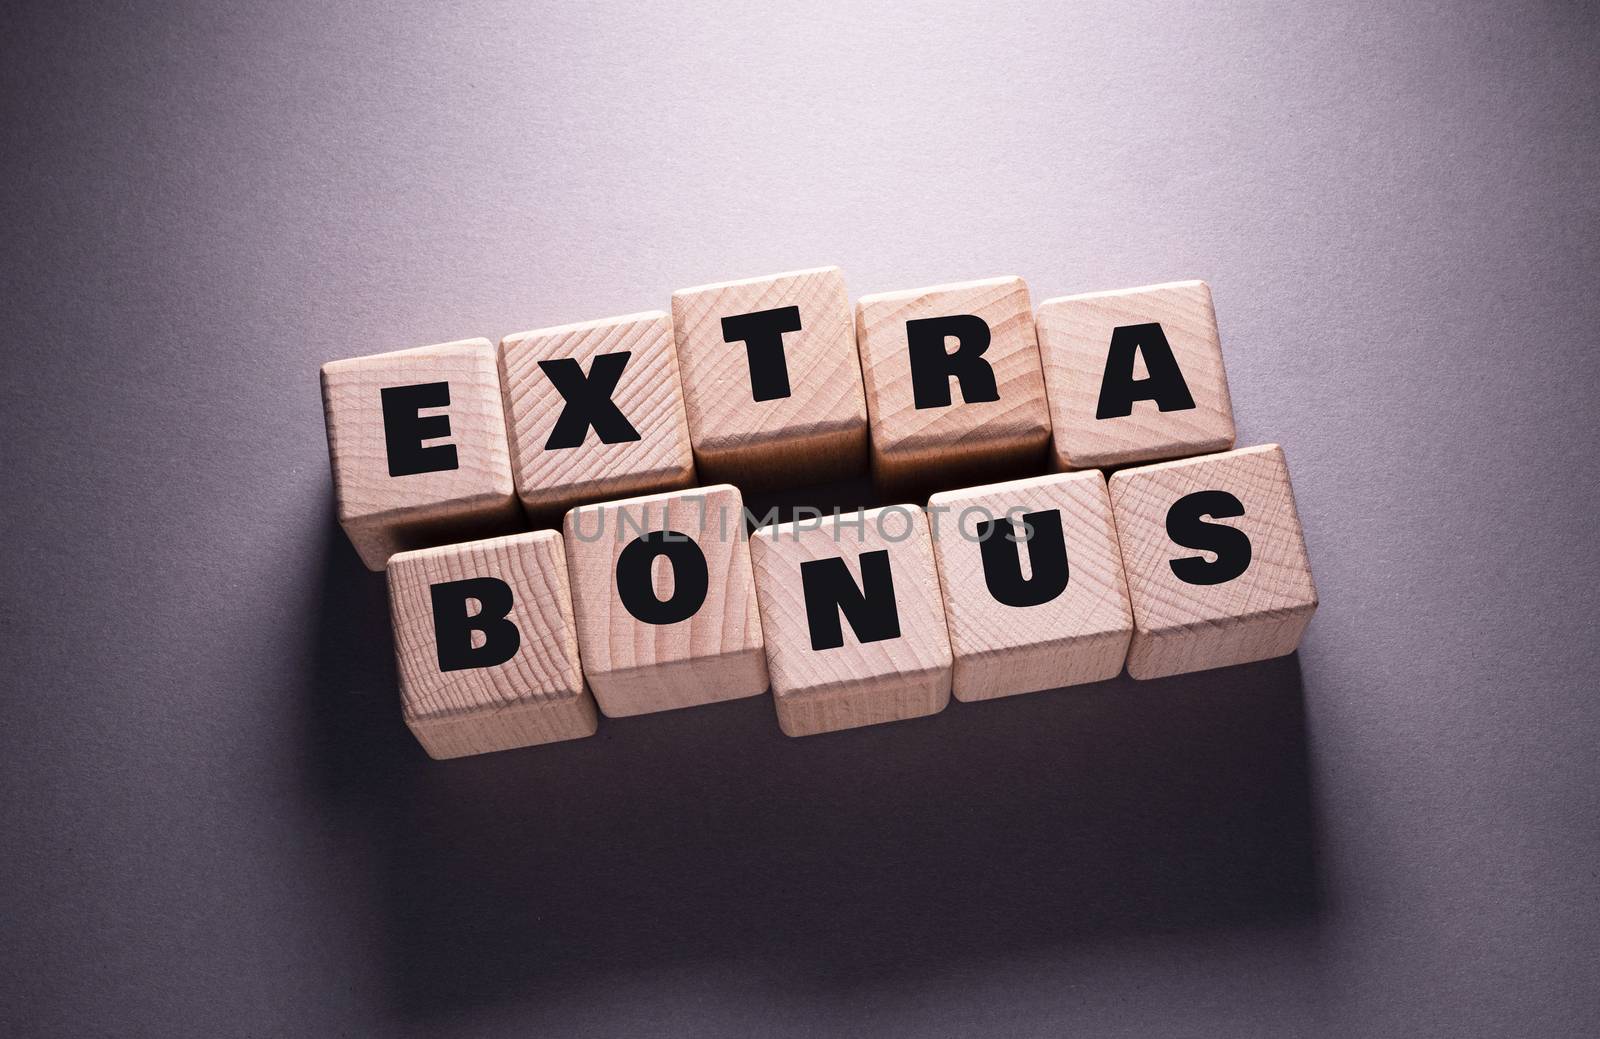 Extra Bonus Word with Wooden Cubes by Jievani